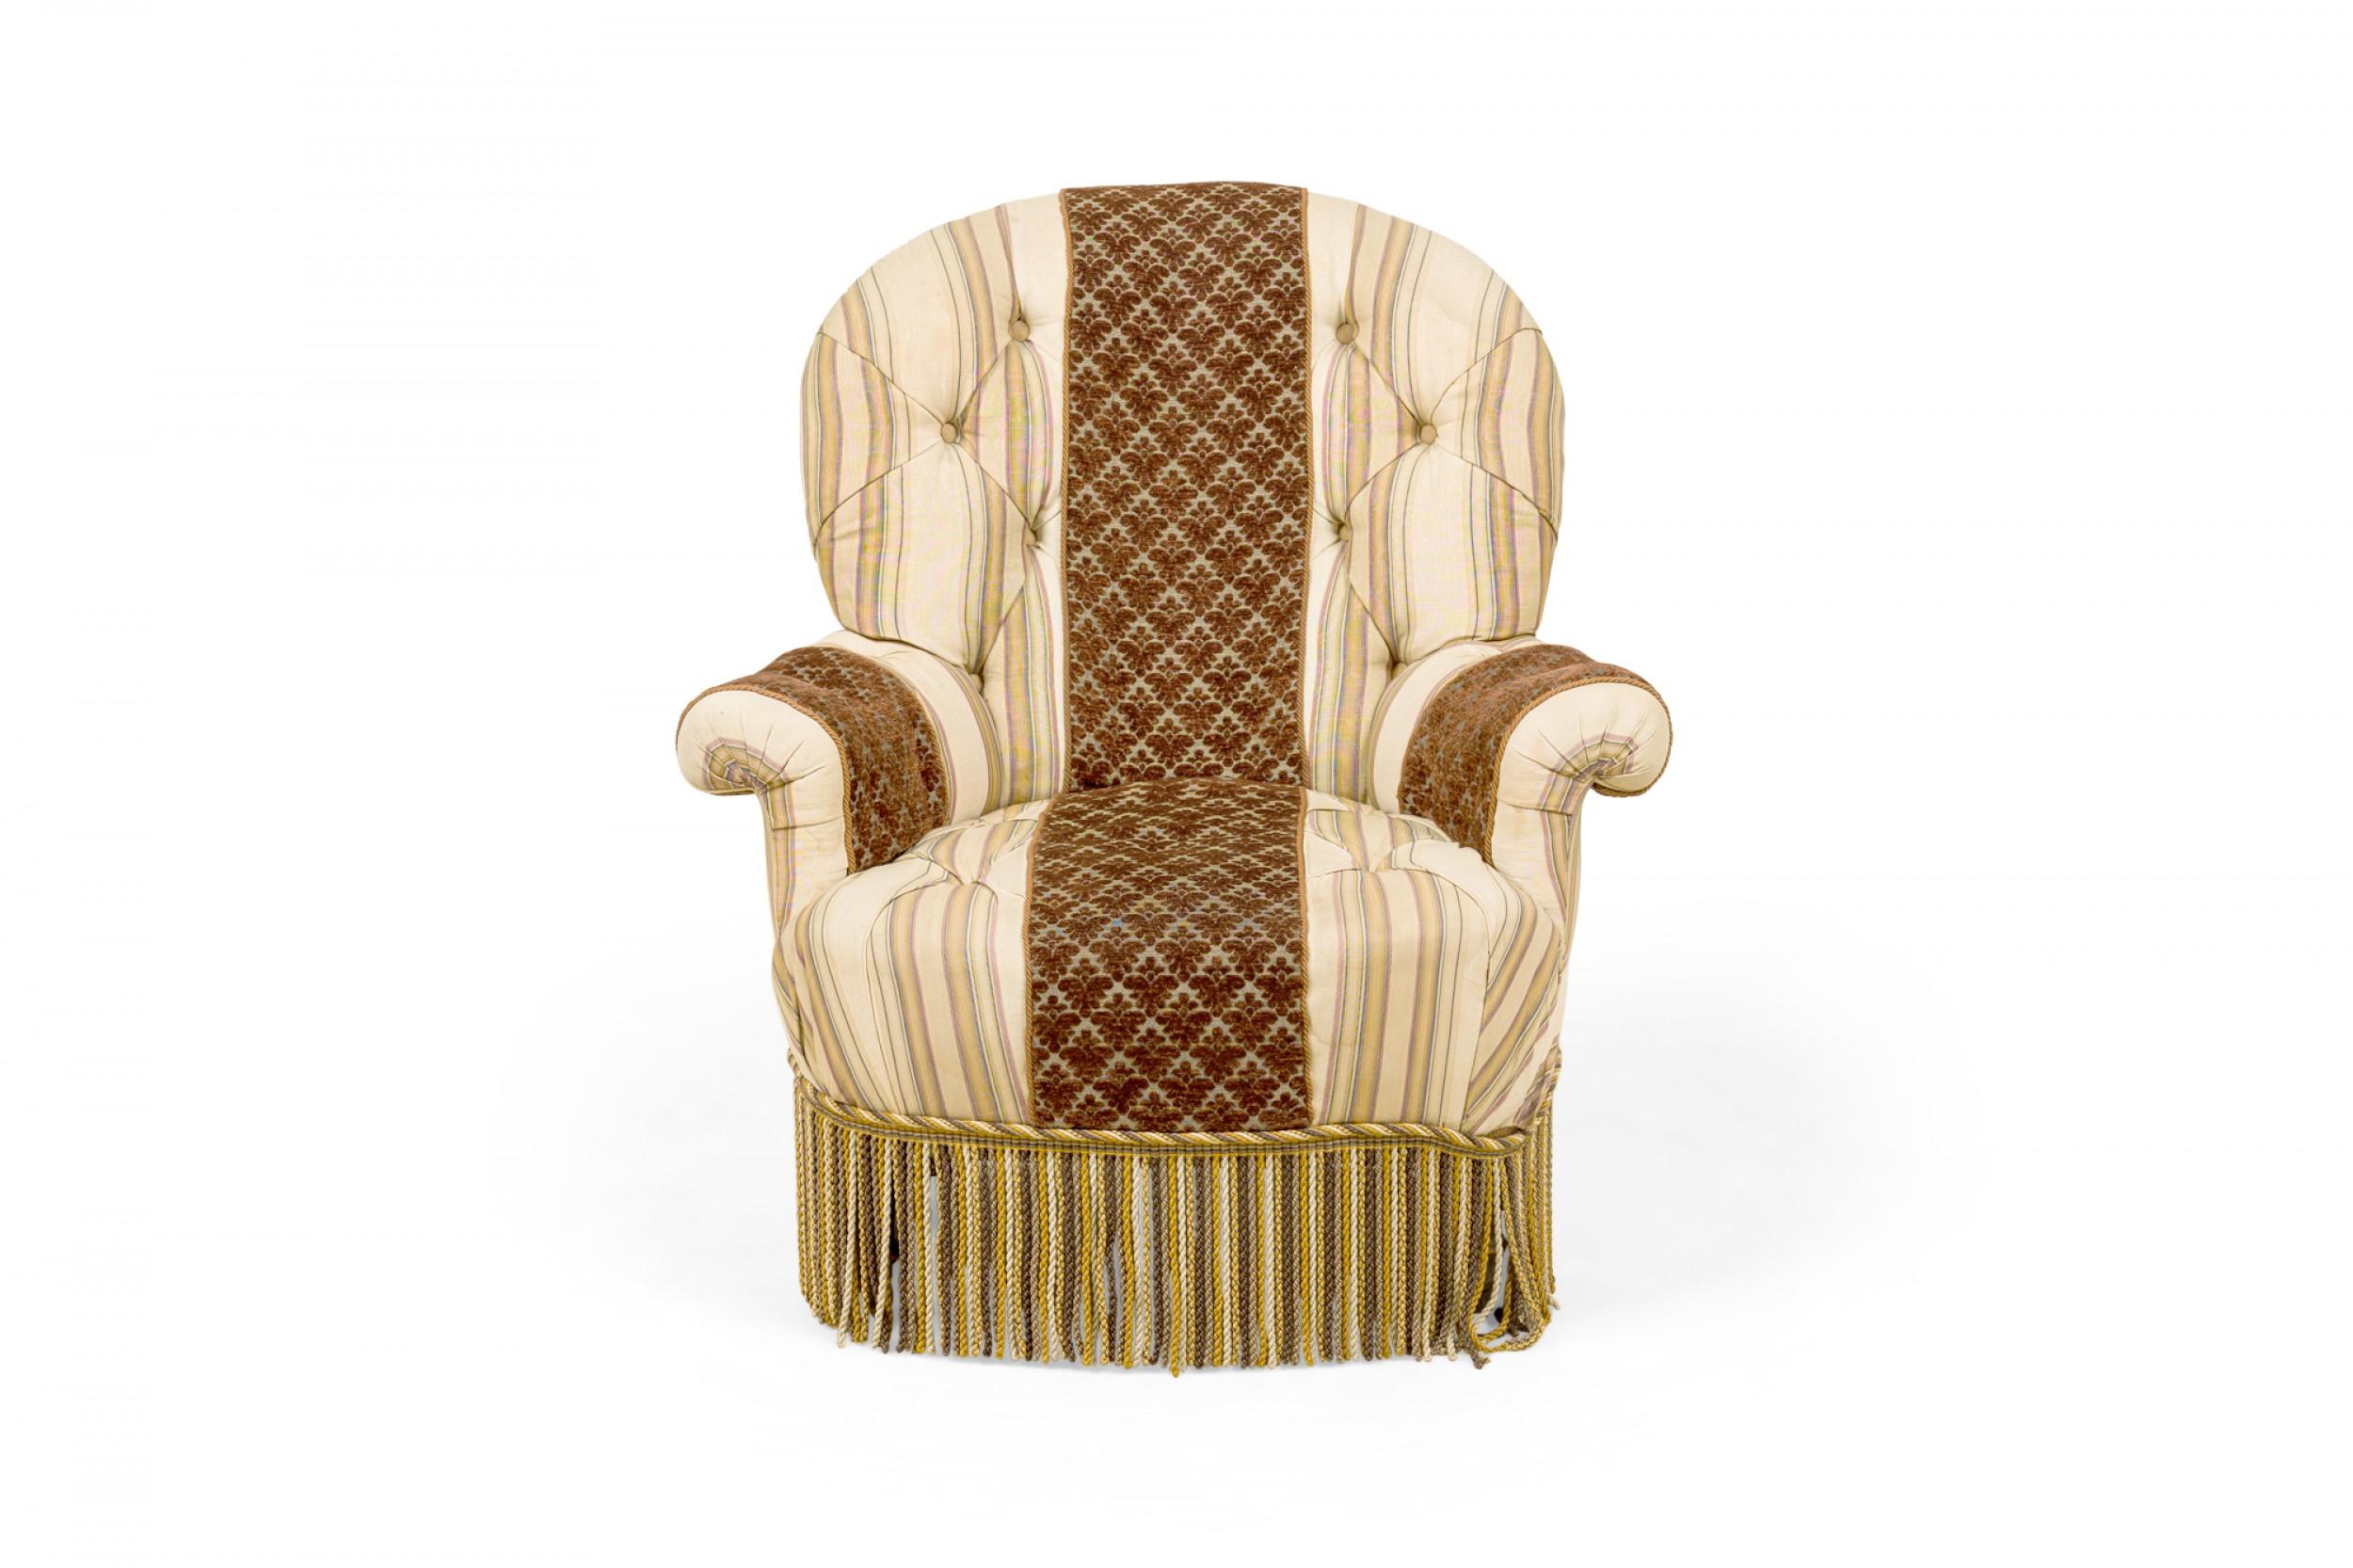 Pair of French Victorian-style armchairs with rounded backs and scroll arms, upholstered in a neutral toned striped fabric with a brown patterned velvet stripe running vertically down the center back, and armrests, accented with button tufting and